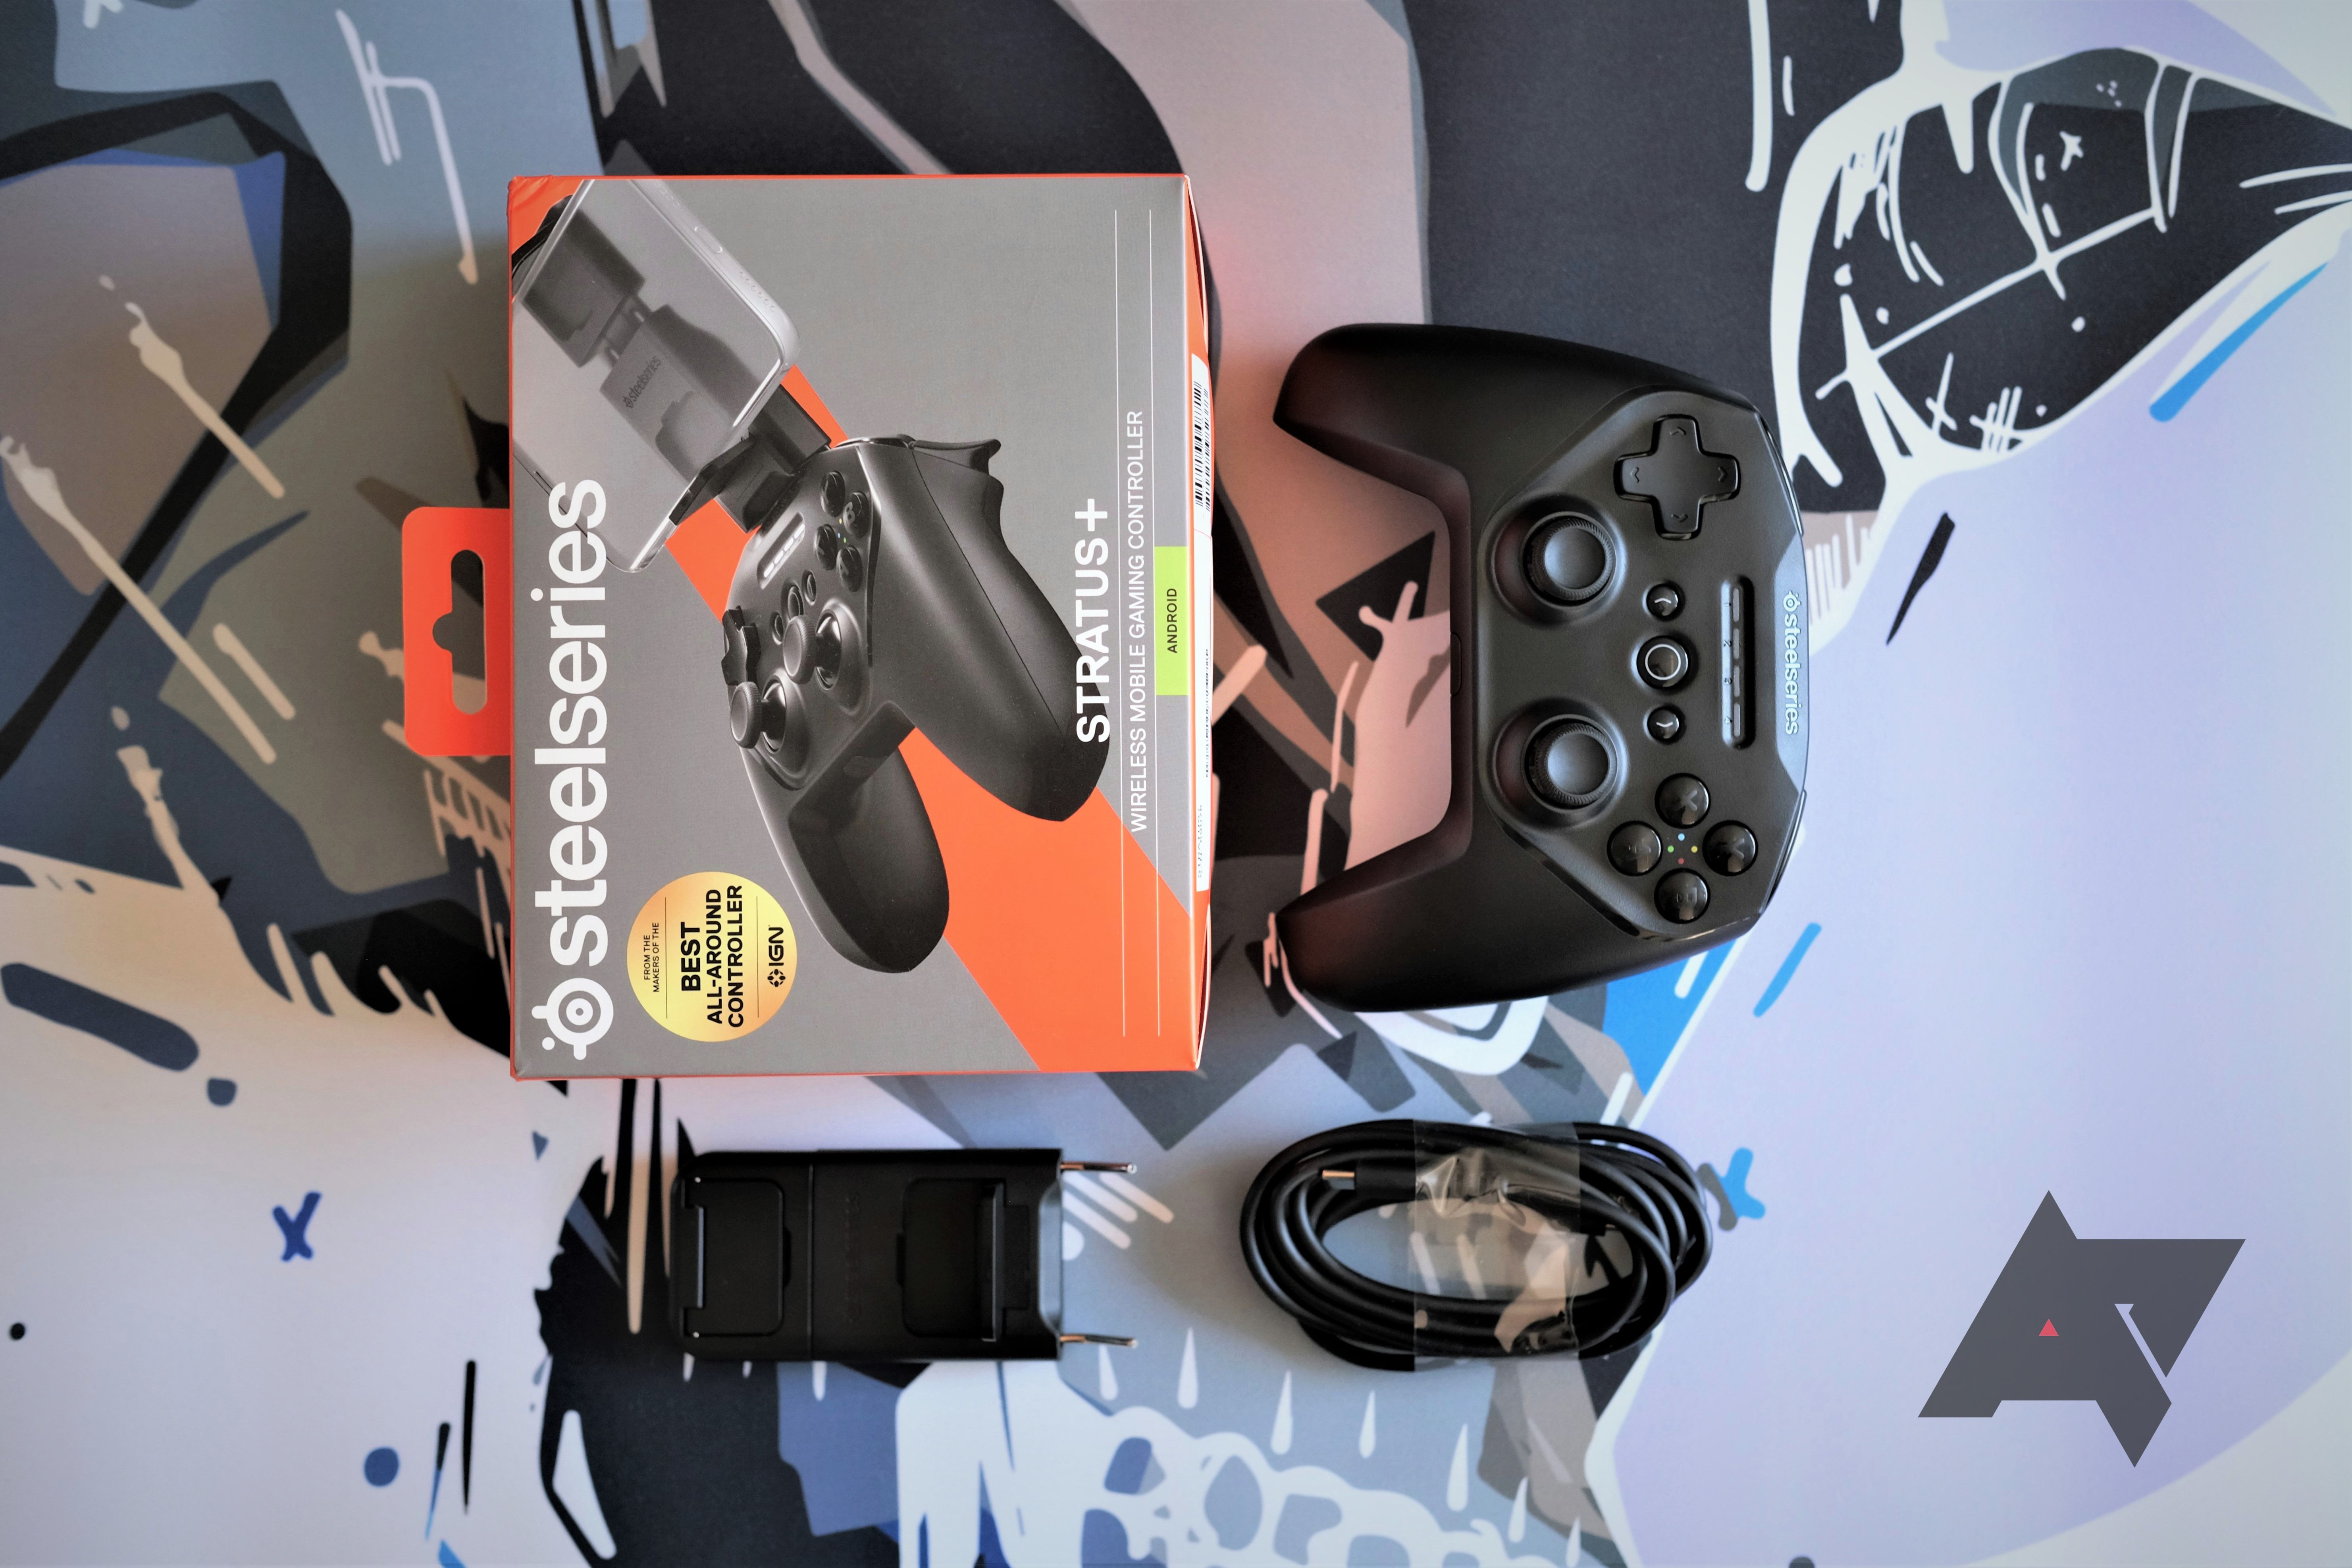 SteelSeries Stratus + Hands-on Box Contents